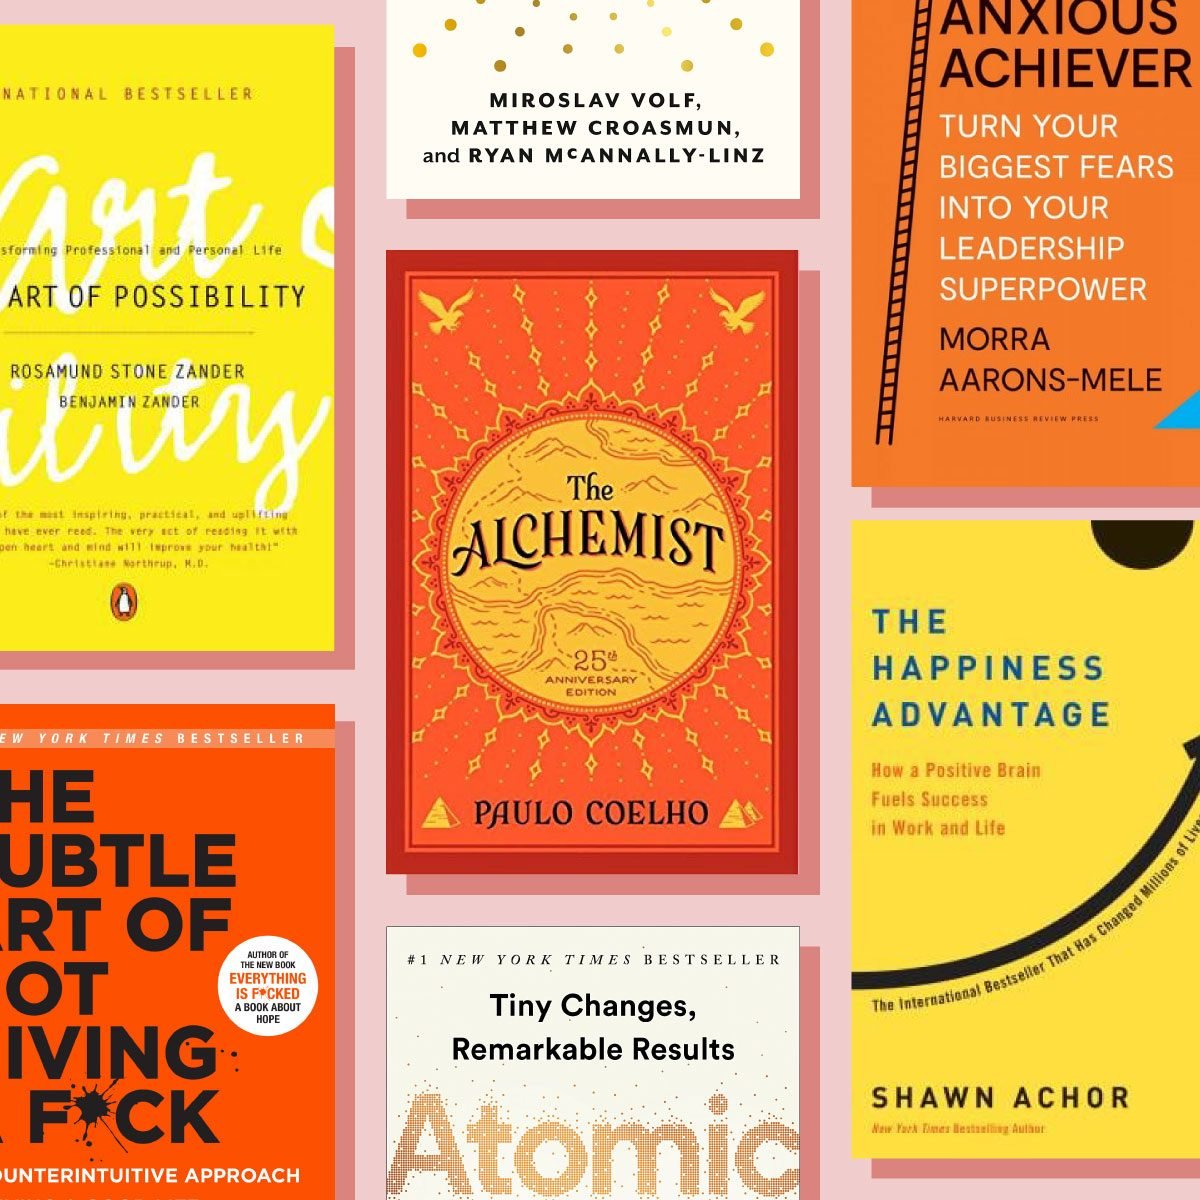 <p>The <a href="https://www.rd.com/list/books-read-before-die/" rel="noopener noreferrer">best books</a> are more than capable of inspiring us—they have the power to ignite change. And those looking for growth have long turned to inspirational books to instill hope and strength in times of inner turmoil, improve happiness and even manage mental wellness. These motivational guides enrich lives by teaching everything from how to be happy to <a href="https://www.rd.com/article/how-to-practice-gratitude/">how to practice gratitude</a>. They encourage readers to keep a <a href="https://www.rd.com/article/positive-attitude/">positive attitude</a>, establish a framework for how to set goals and ponder <a href="https://www.rd.com/article/what-is-the-purpose-of-life/">the purpose of life</a>.</p> <p>This list of both fiction and <a href="https://www.rd.com/list/best-nonfiction-books/" rel="noopener noreferrer">nonfiction books</a> contains titles for anyone who wants to gain wisdom, find direction, build your career, begin self-reflection or just <a href="https://www.thehealthy.com/mental-health/happiness/deepak-chopra-meditation-for-happiness/" rel="noopener">become happier</a>. Here, you'll find some of the best inspirational books you can read to improve various aspects of your life. We chose these titles from a wide range of genres, as well as bestsellers, critically acclaimed selections and those that have gained high ratings among thought leaders and armchair critics alike. It's our hope that these inspirational books motivate you to find your best sense of self.</p>